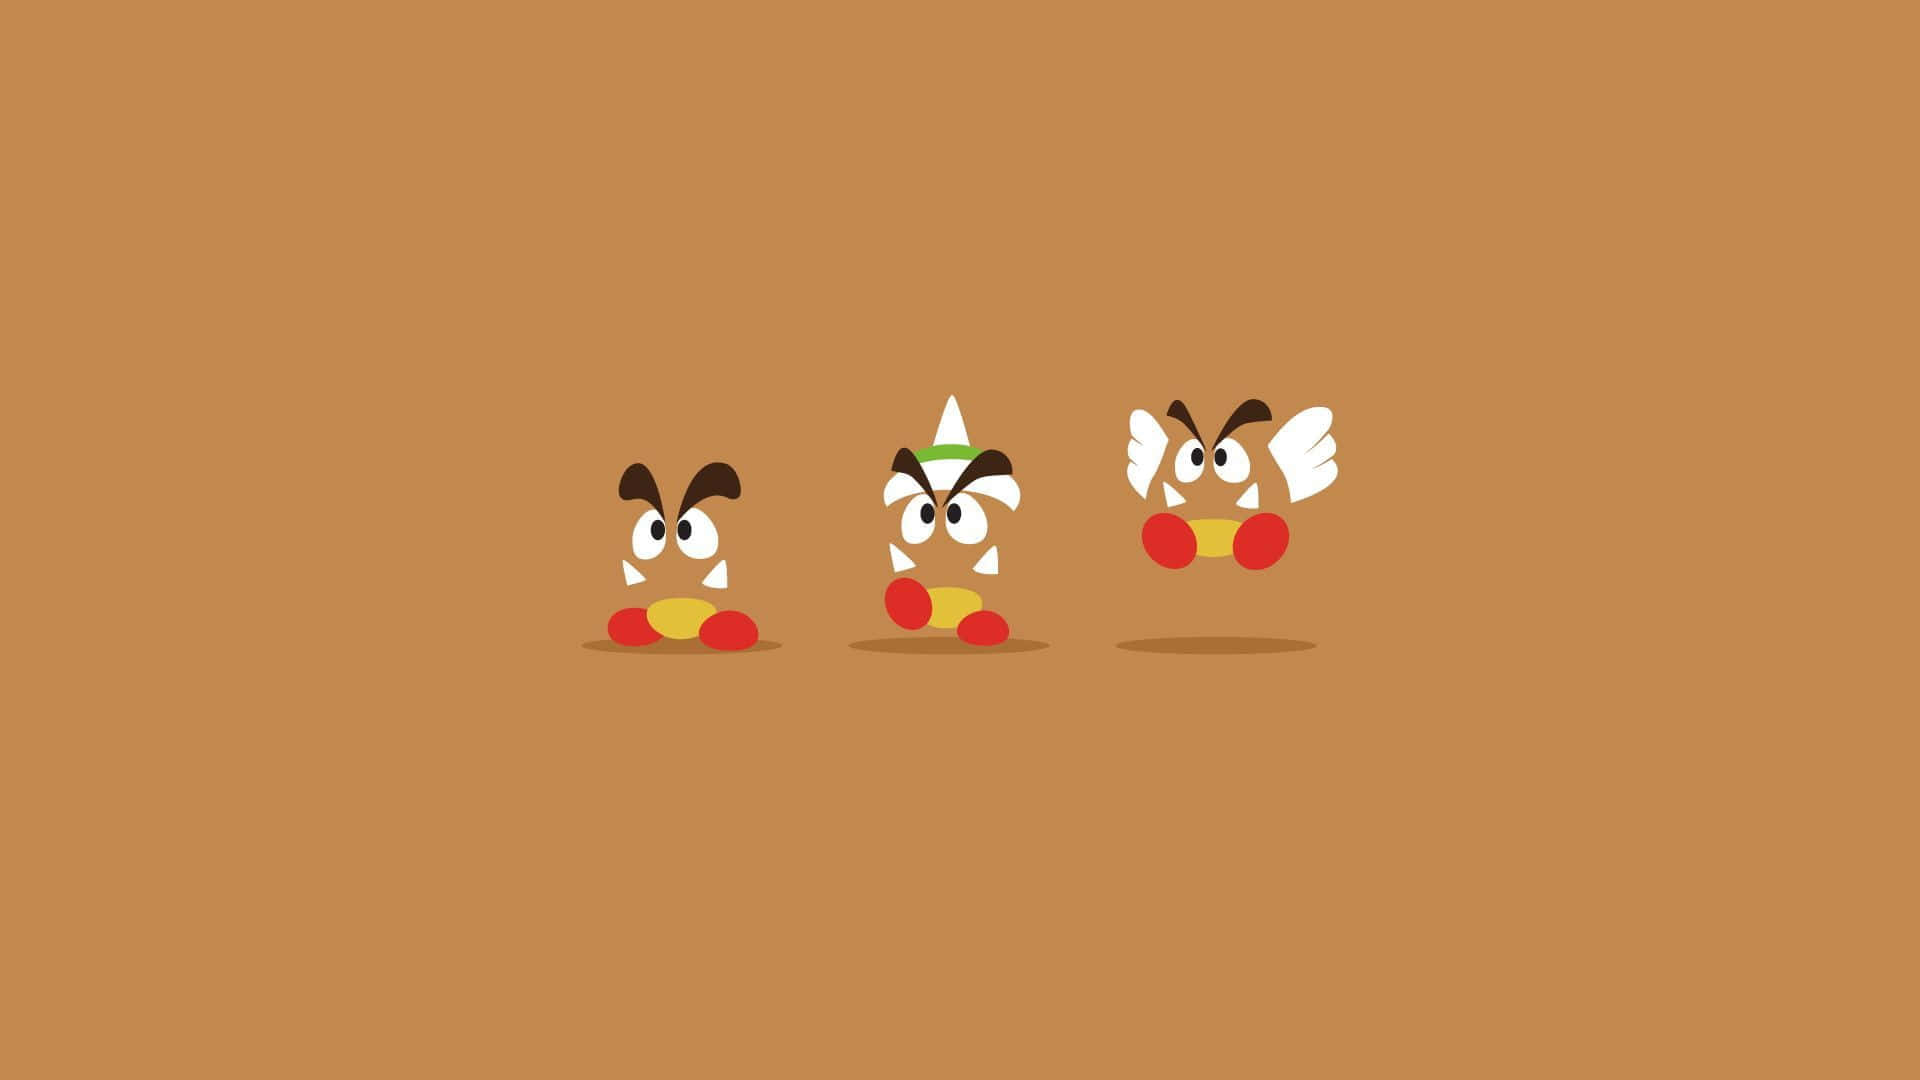 Goomba Enemy Character from Super Mario Wallpaper